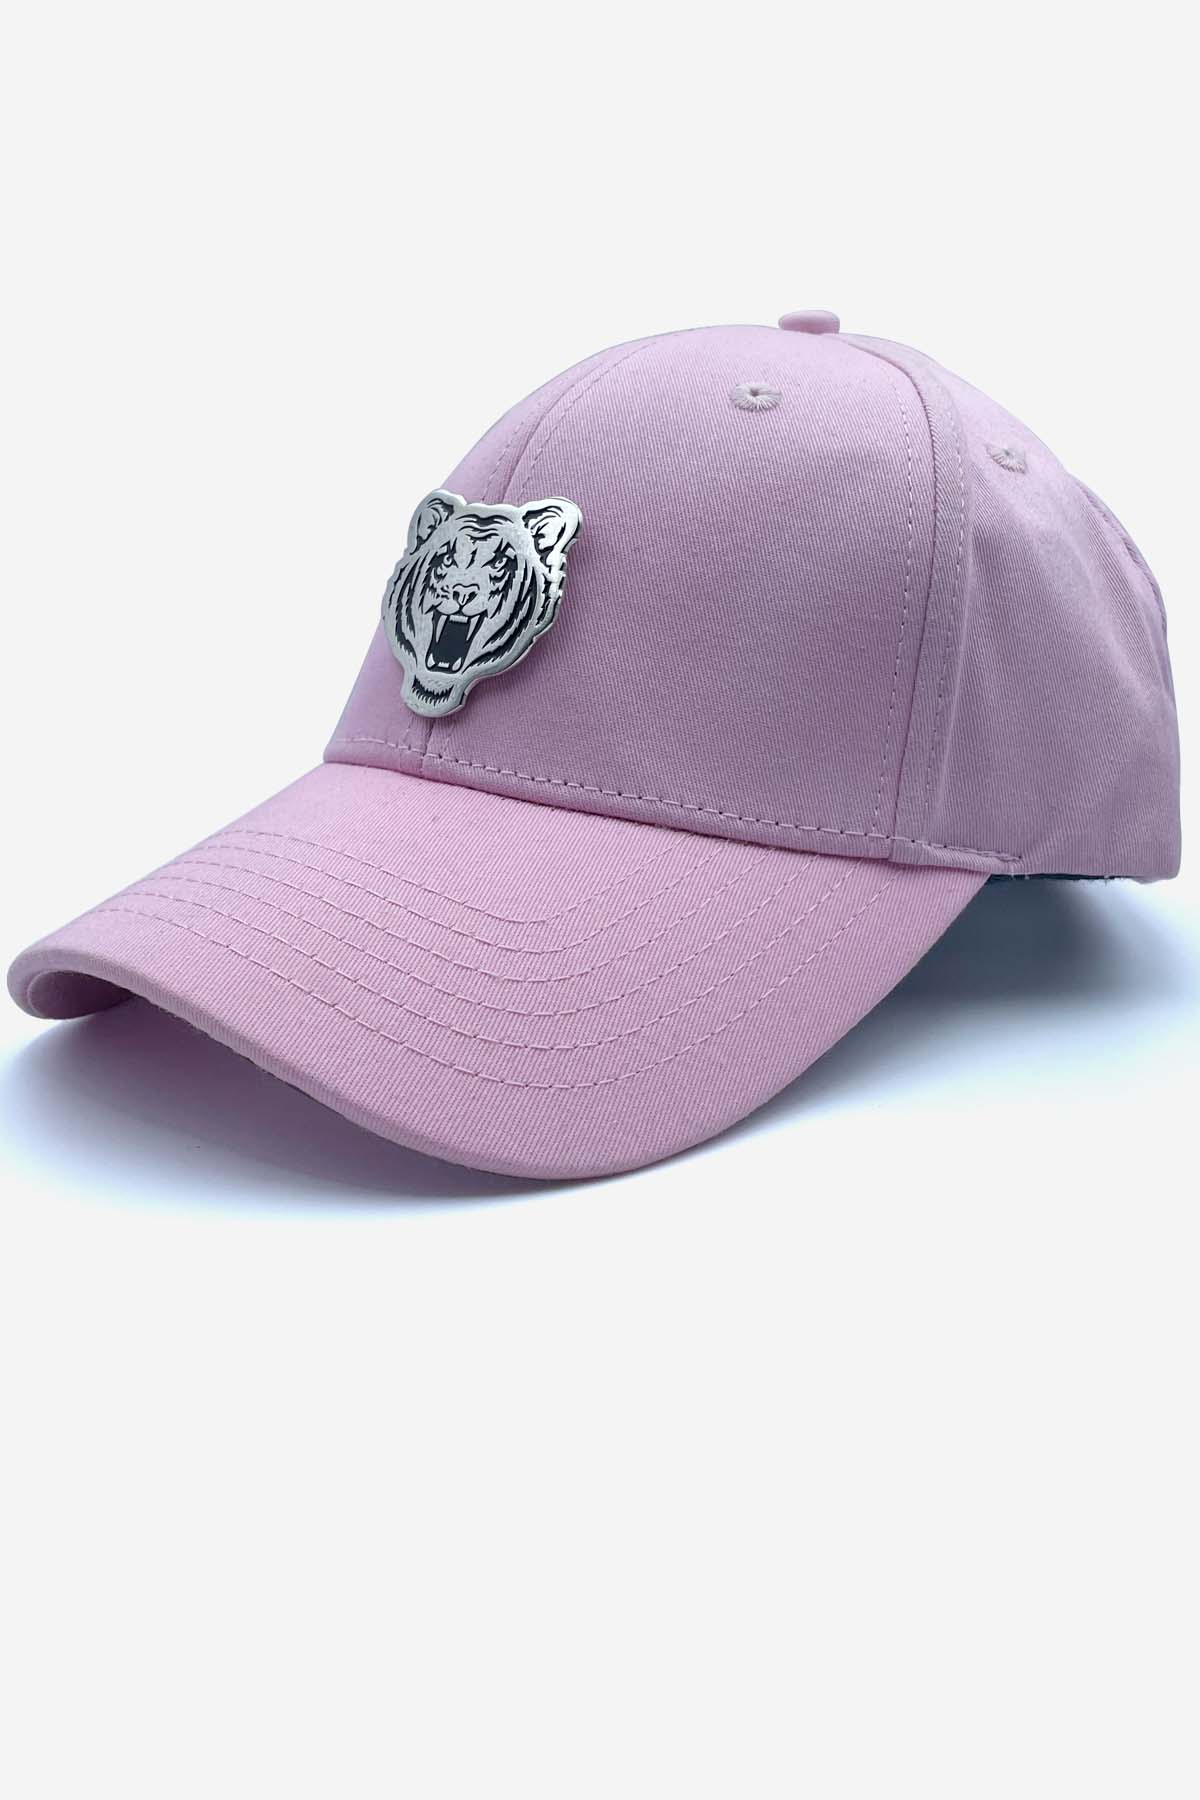 PINK TIGER CAP WITH SILVER LOGO